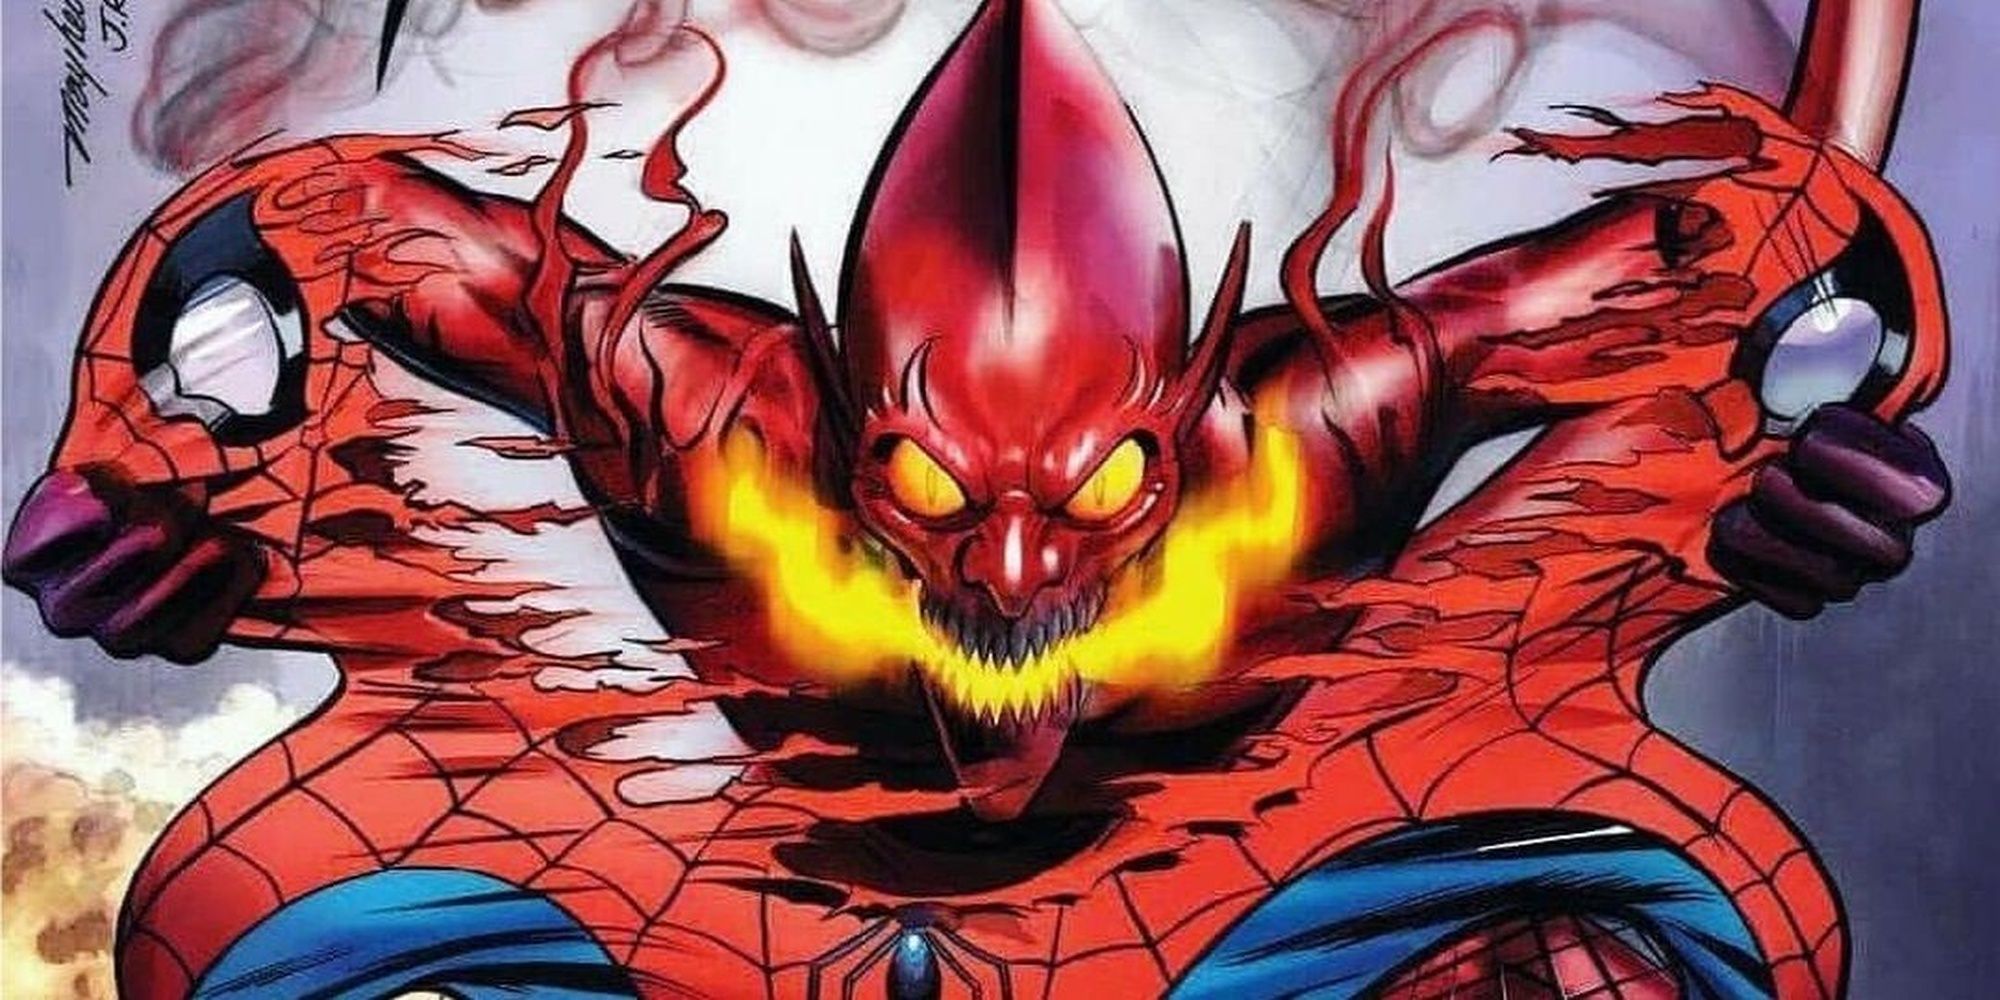 Red Goblin Tearing Spider-Man's Costume Cropped